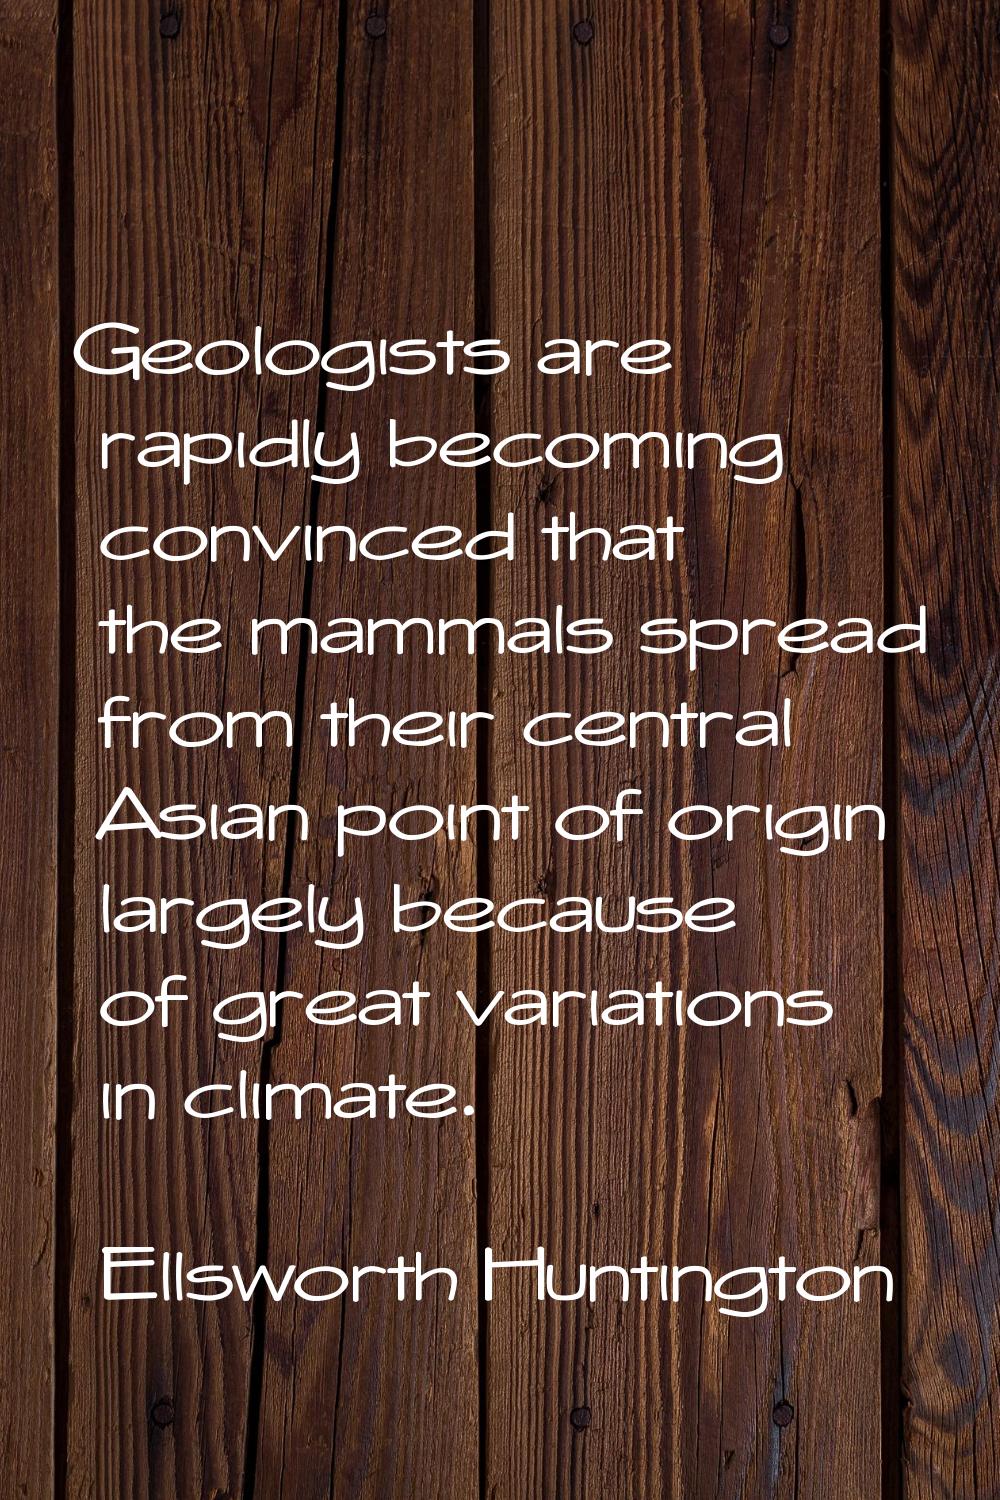 Geologists are rapidly becoming convinced that the mammals spread from their central Asian point of